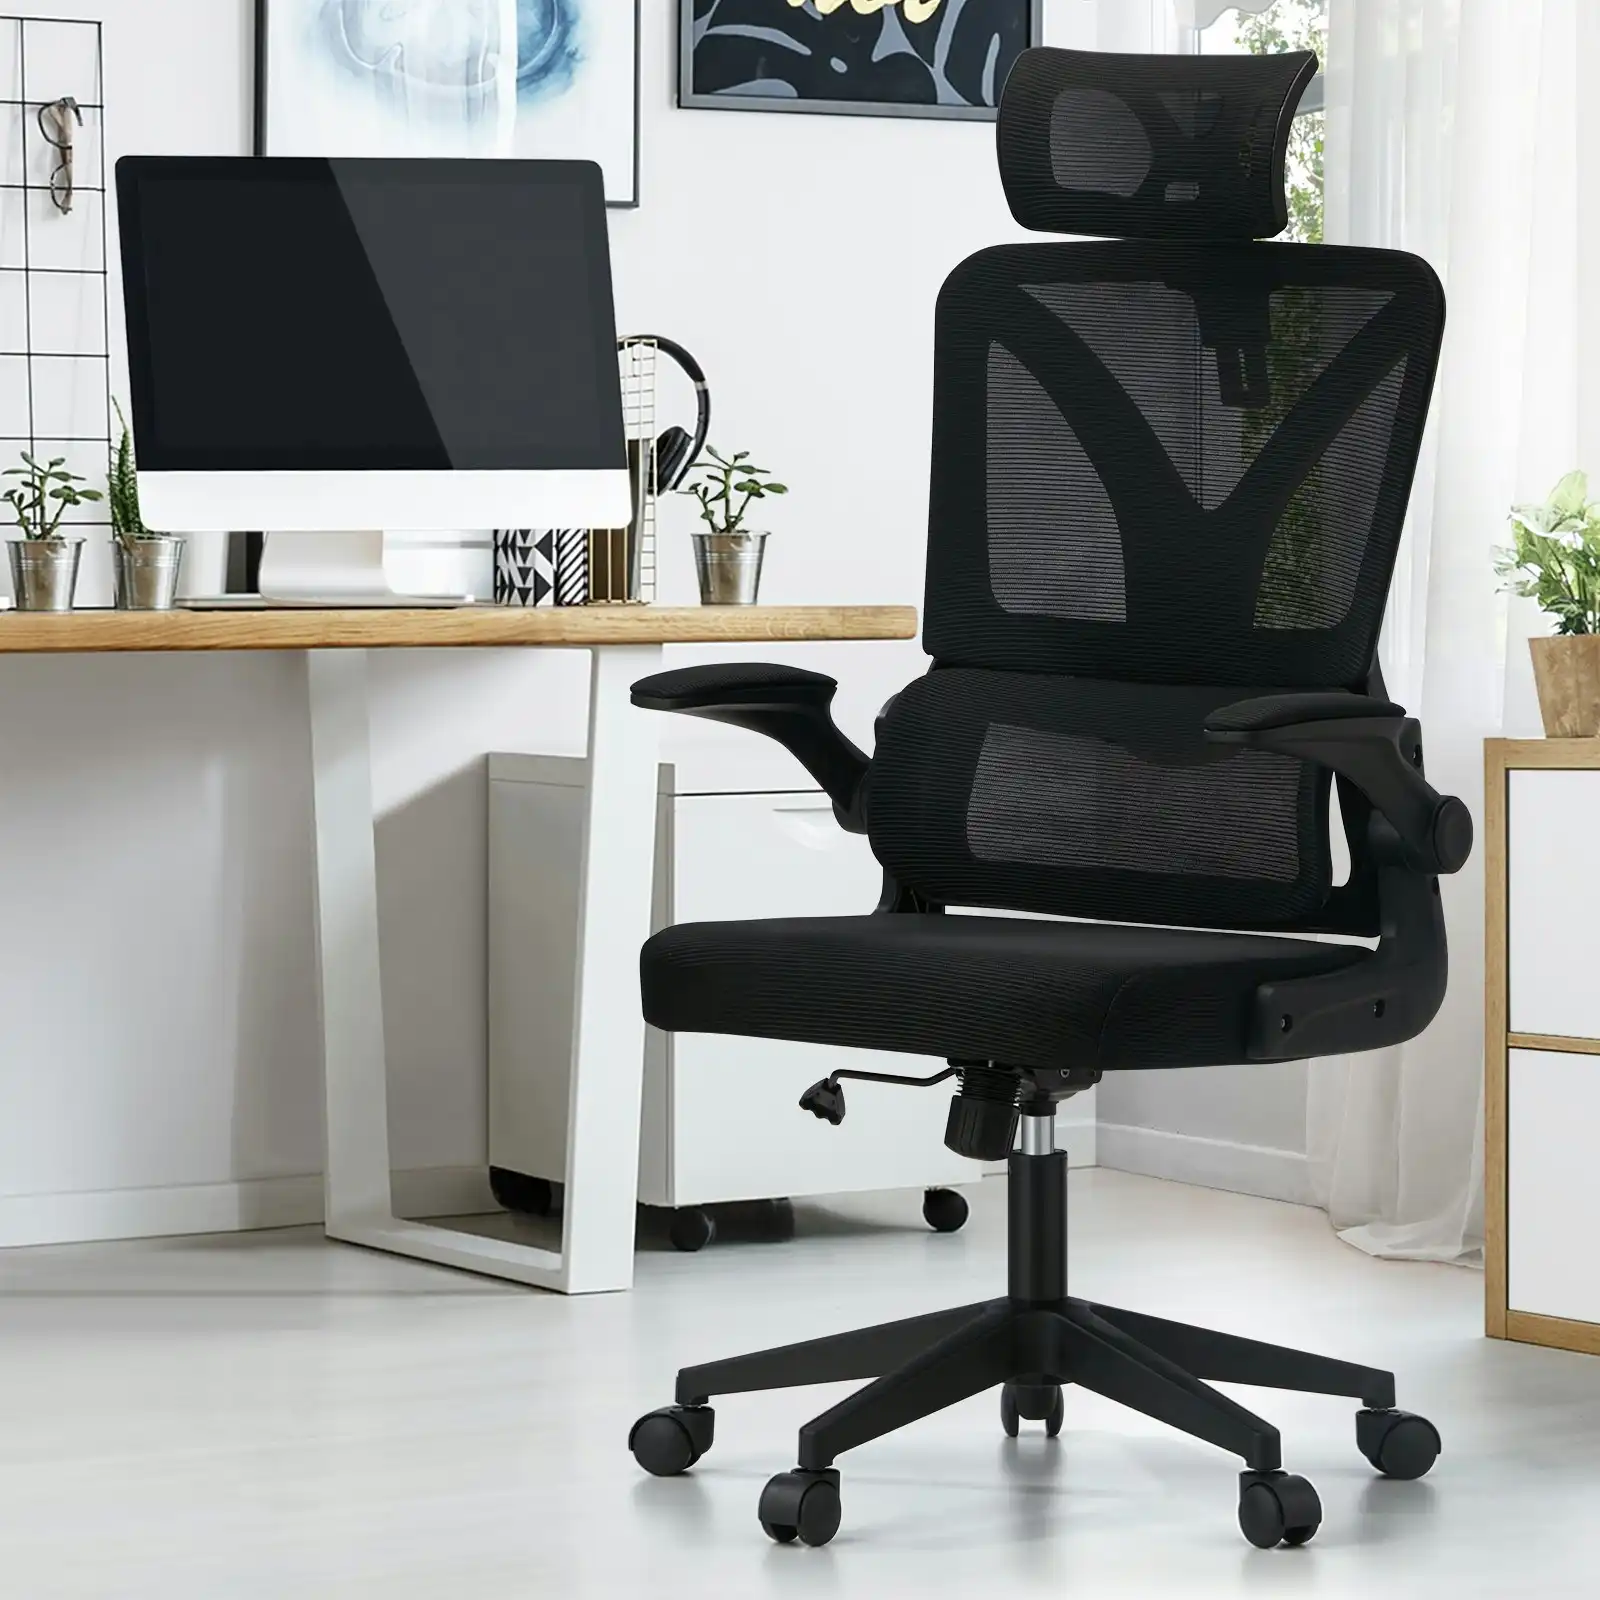 Oikiture Mesh Office Chair Adjustable Lumbar Support Reclining D-Shape Black